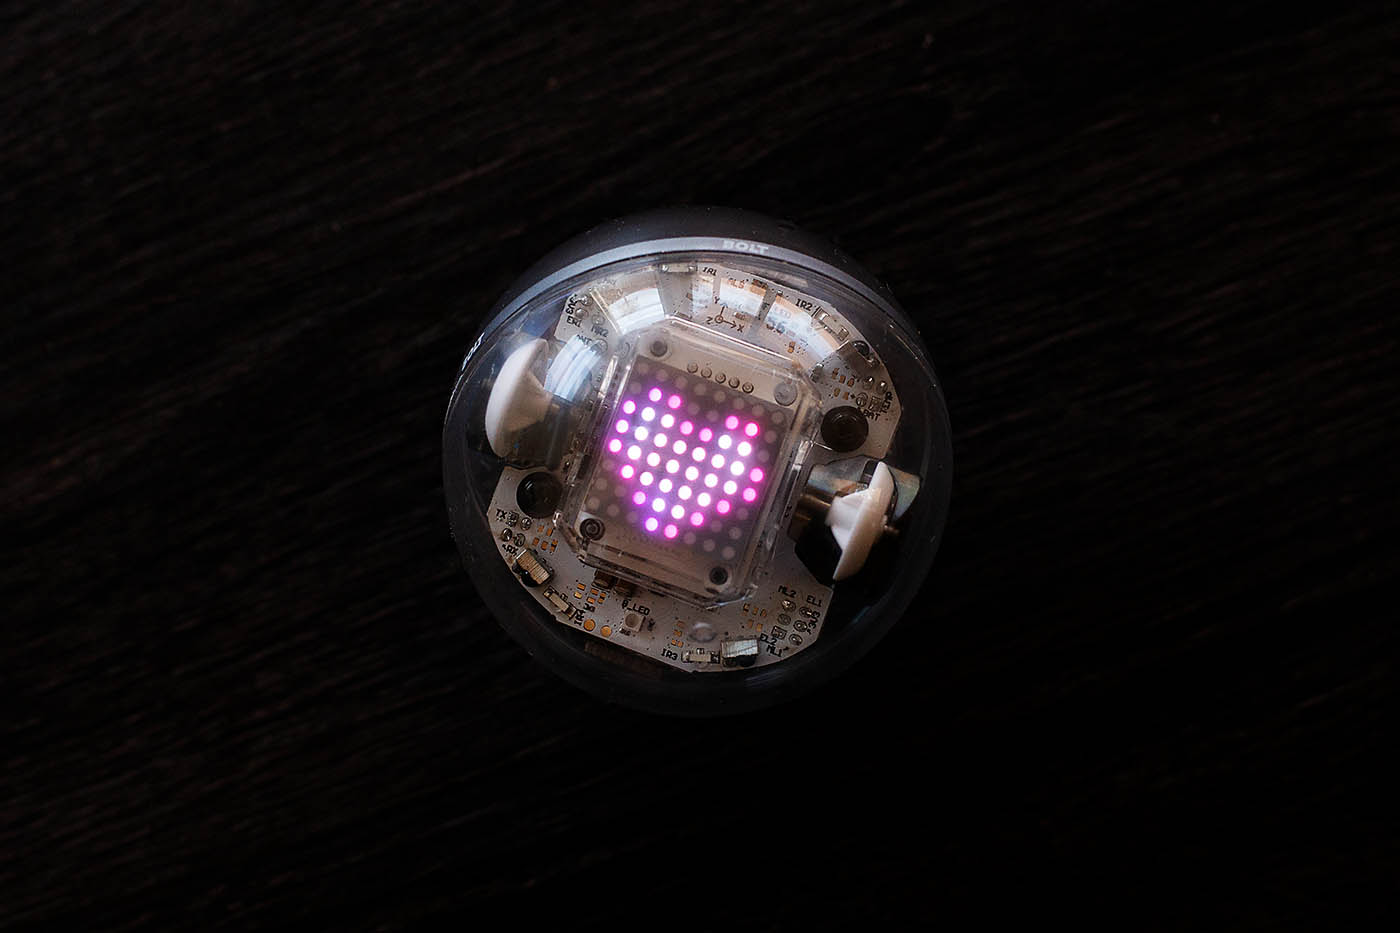 Check Out the Latest Robot from Sphero - Sphero BOLT!